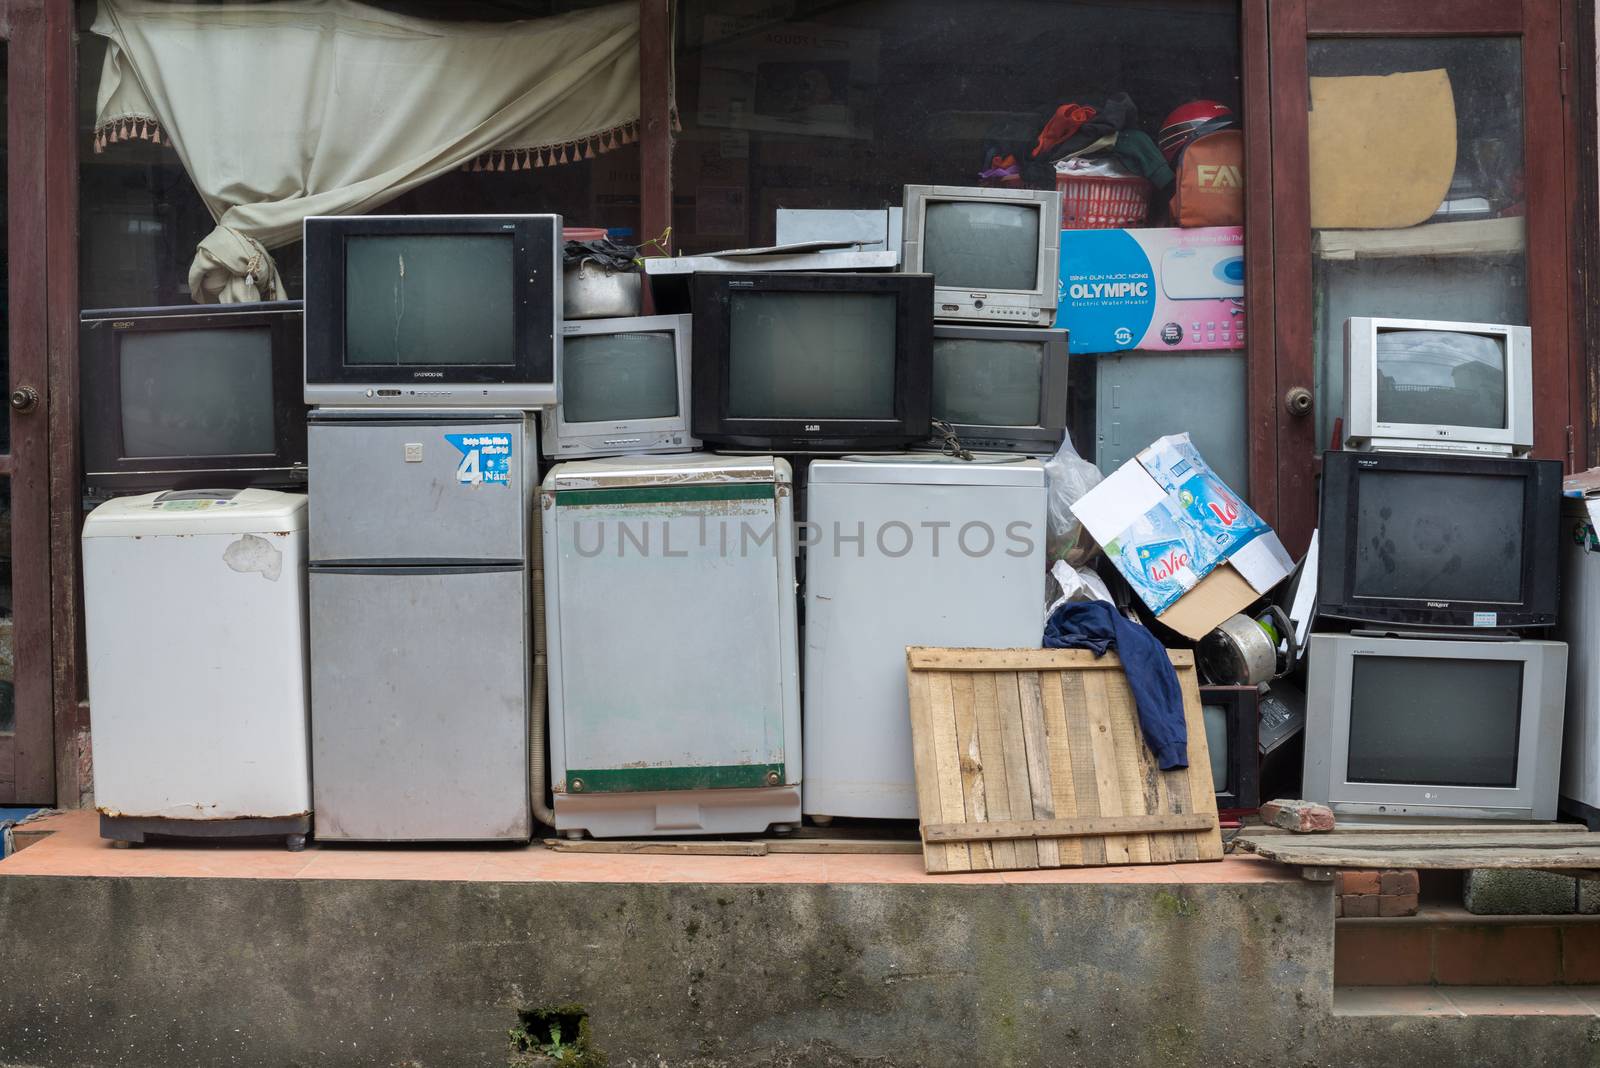 The remains Wreck of the damaged television and some Electronic goods